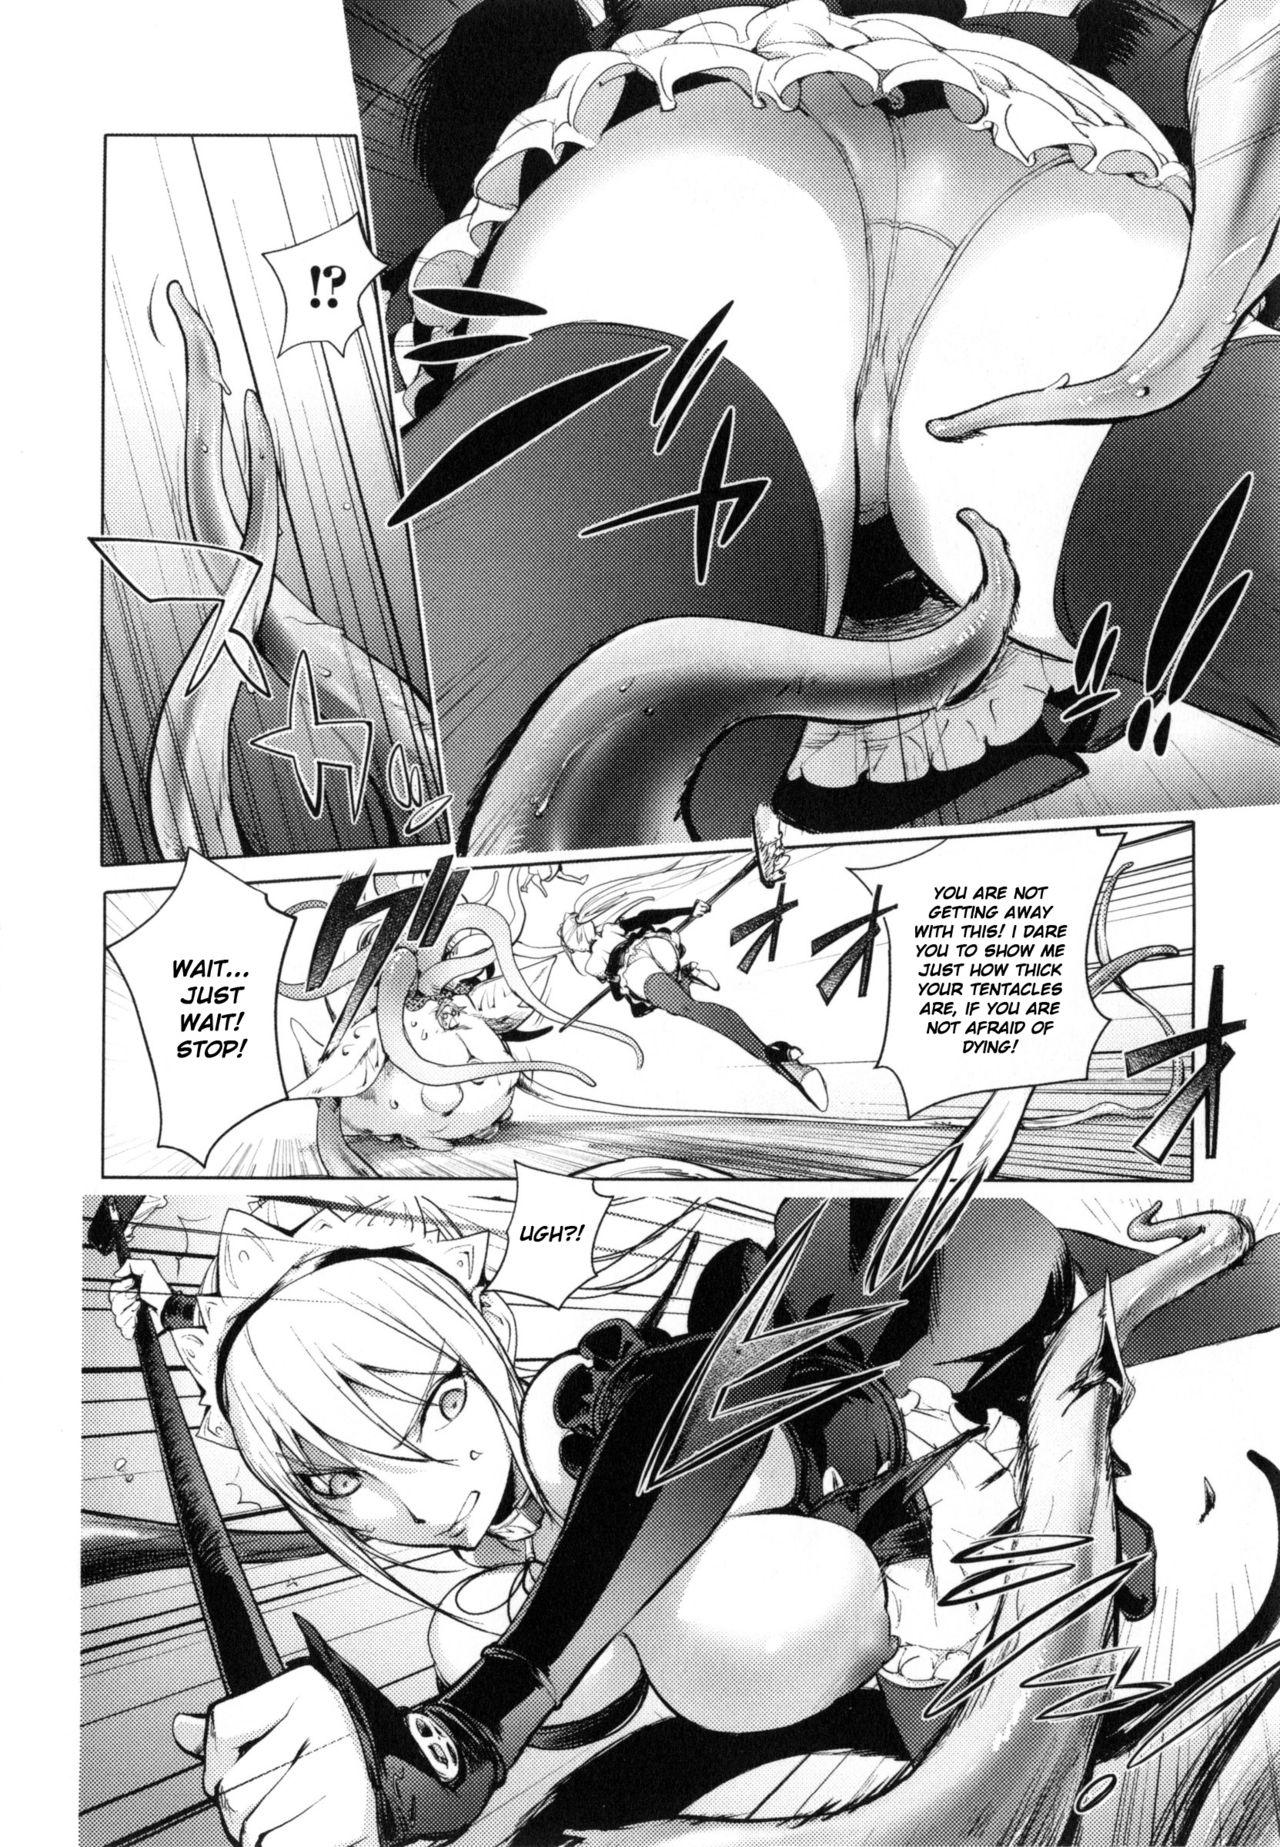 Best Blow Job Shokushu Ouji | The Adventures Of The Three Heroes: Chapter 5 - The Tentacle Prince Women - Page 8